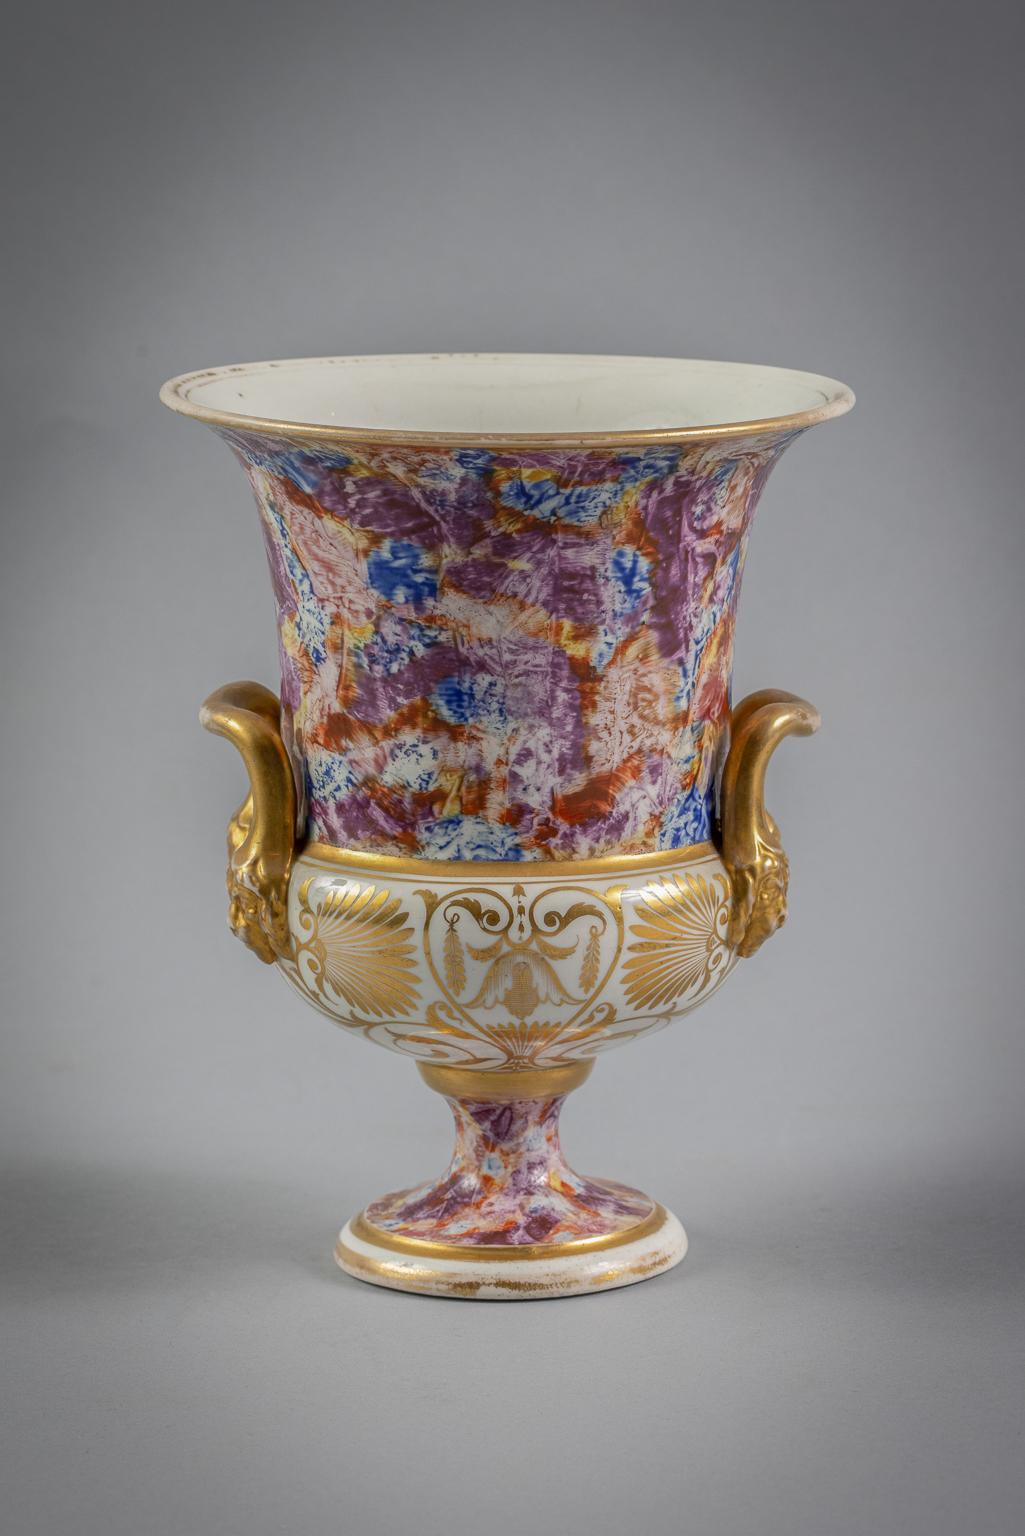 With lion-masked handles, marbleized decoration and with floral spray in the cartouche.